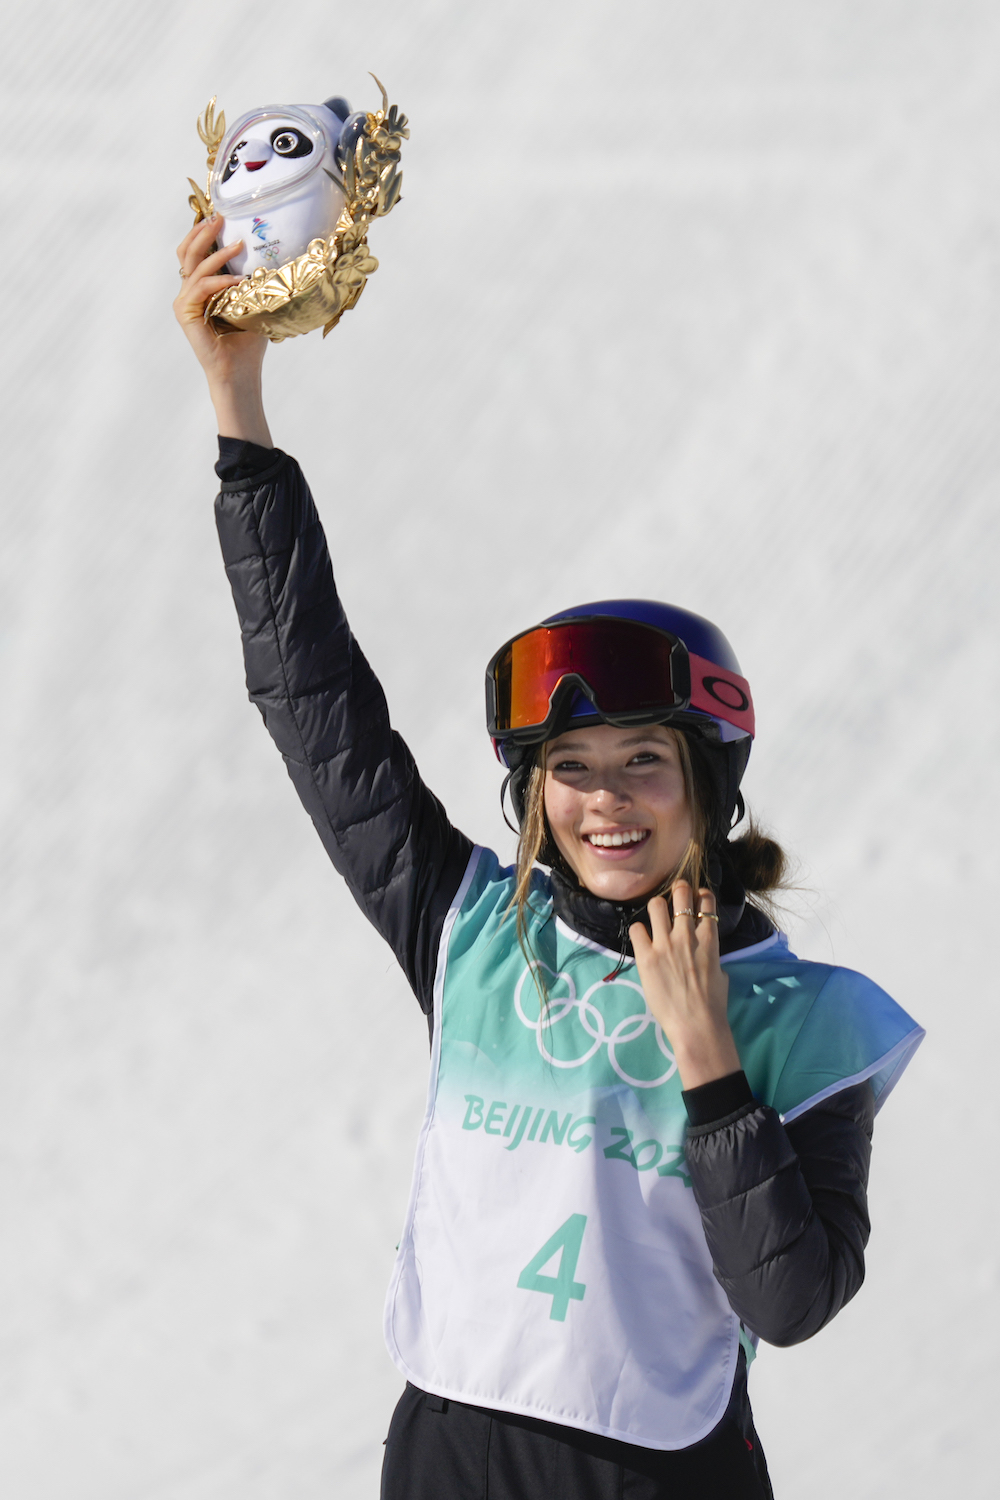 China euphoric after US-born Chinese freeskier Eileen Gu wins Olympic Gold  -  - News from Singapore, Asia and around the world